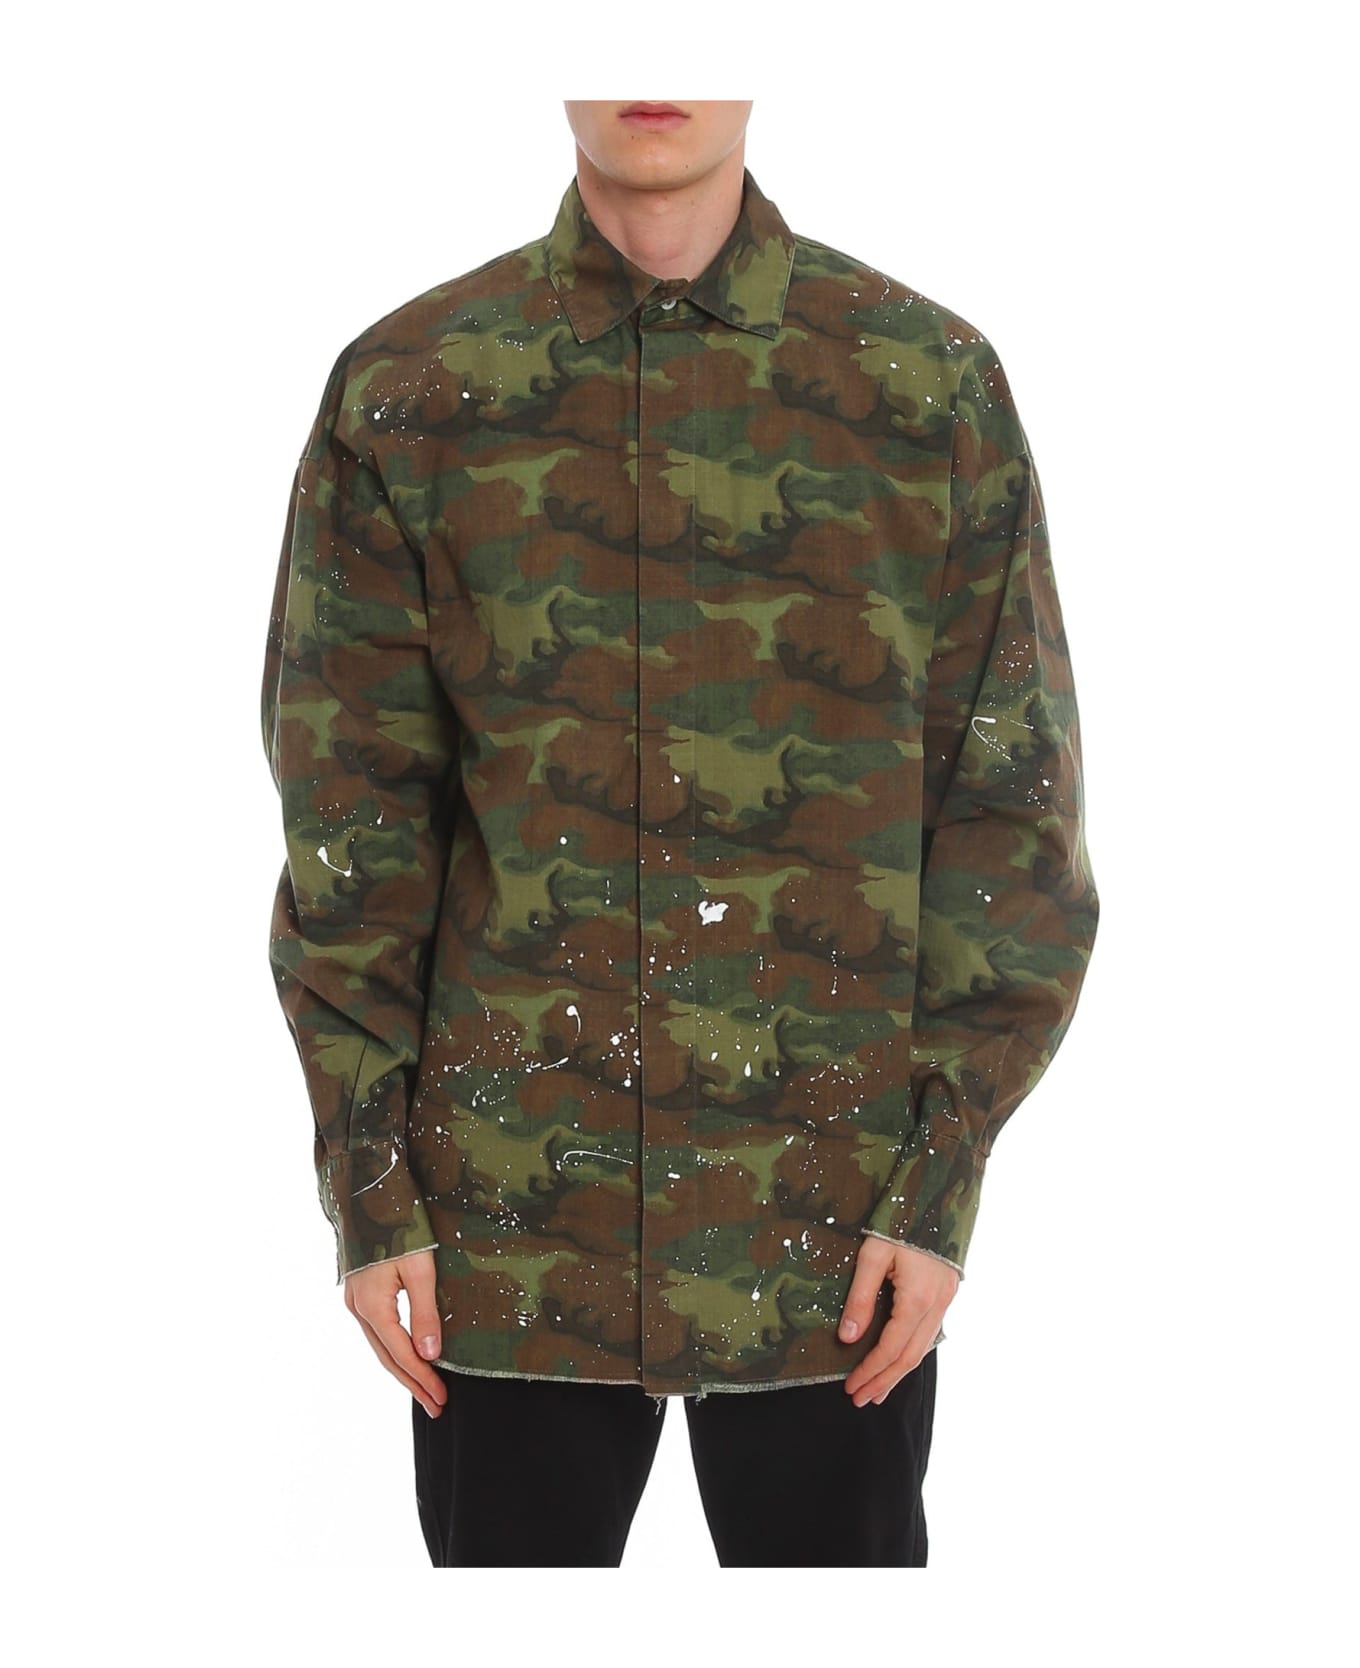 Palm Angels Camouflage Print Shirt - Green シャツ